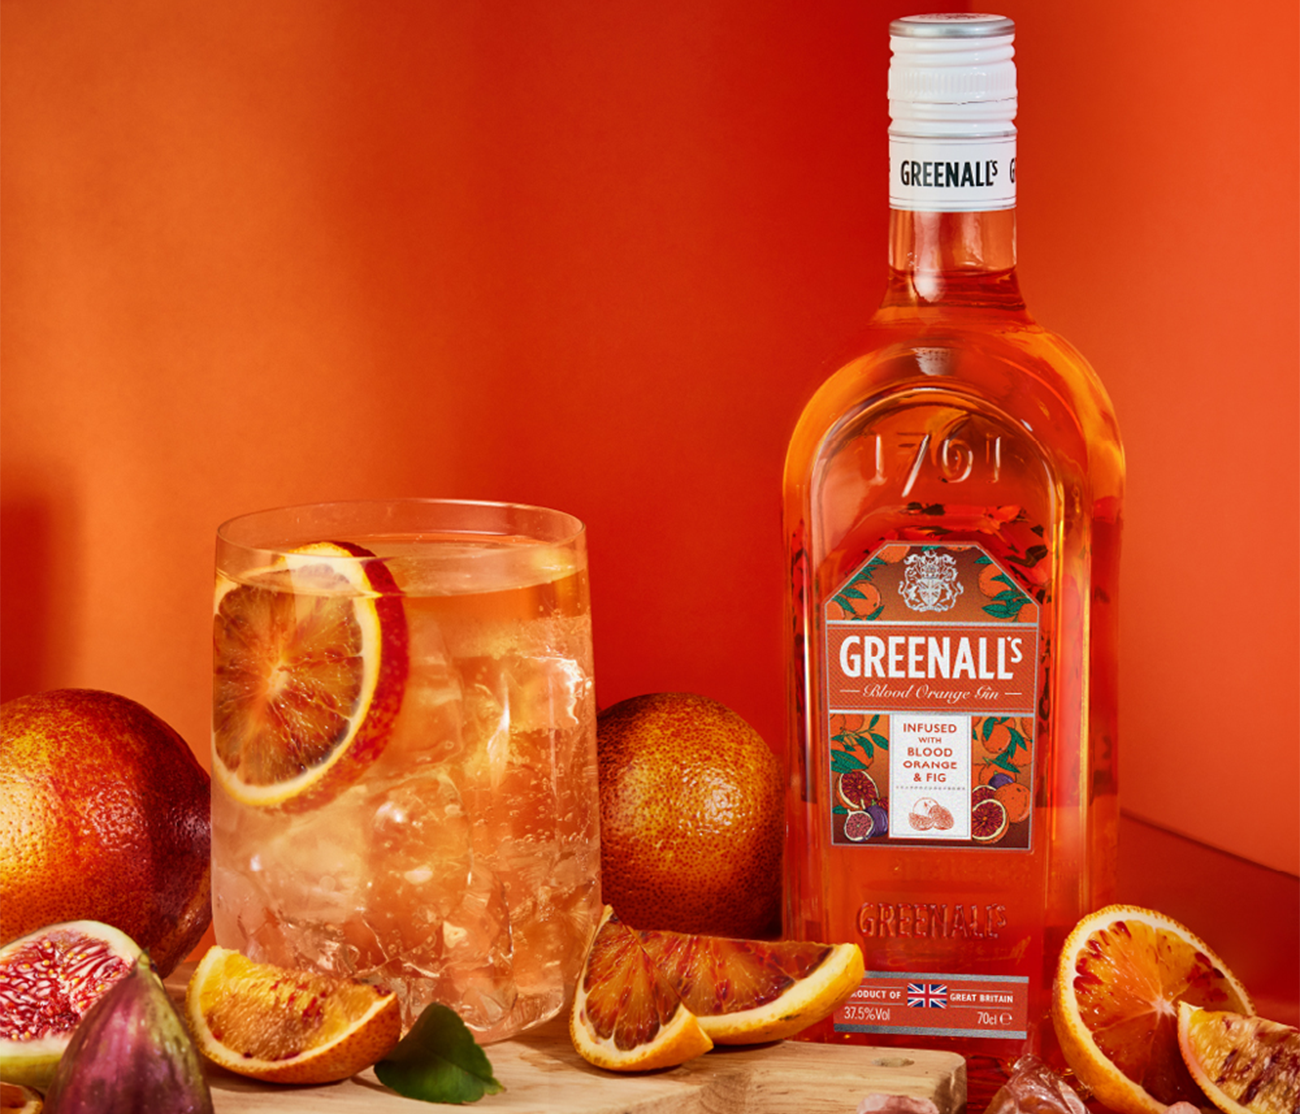 greenalls-blood-orange-and-fig-gin-lifestyle-new (2).png